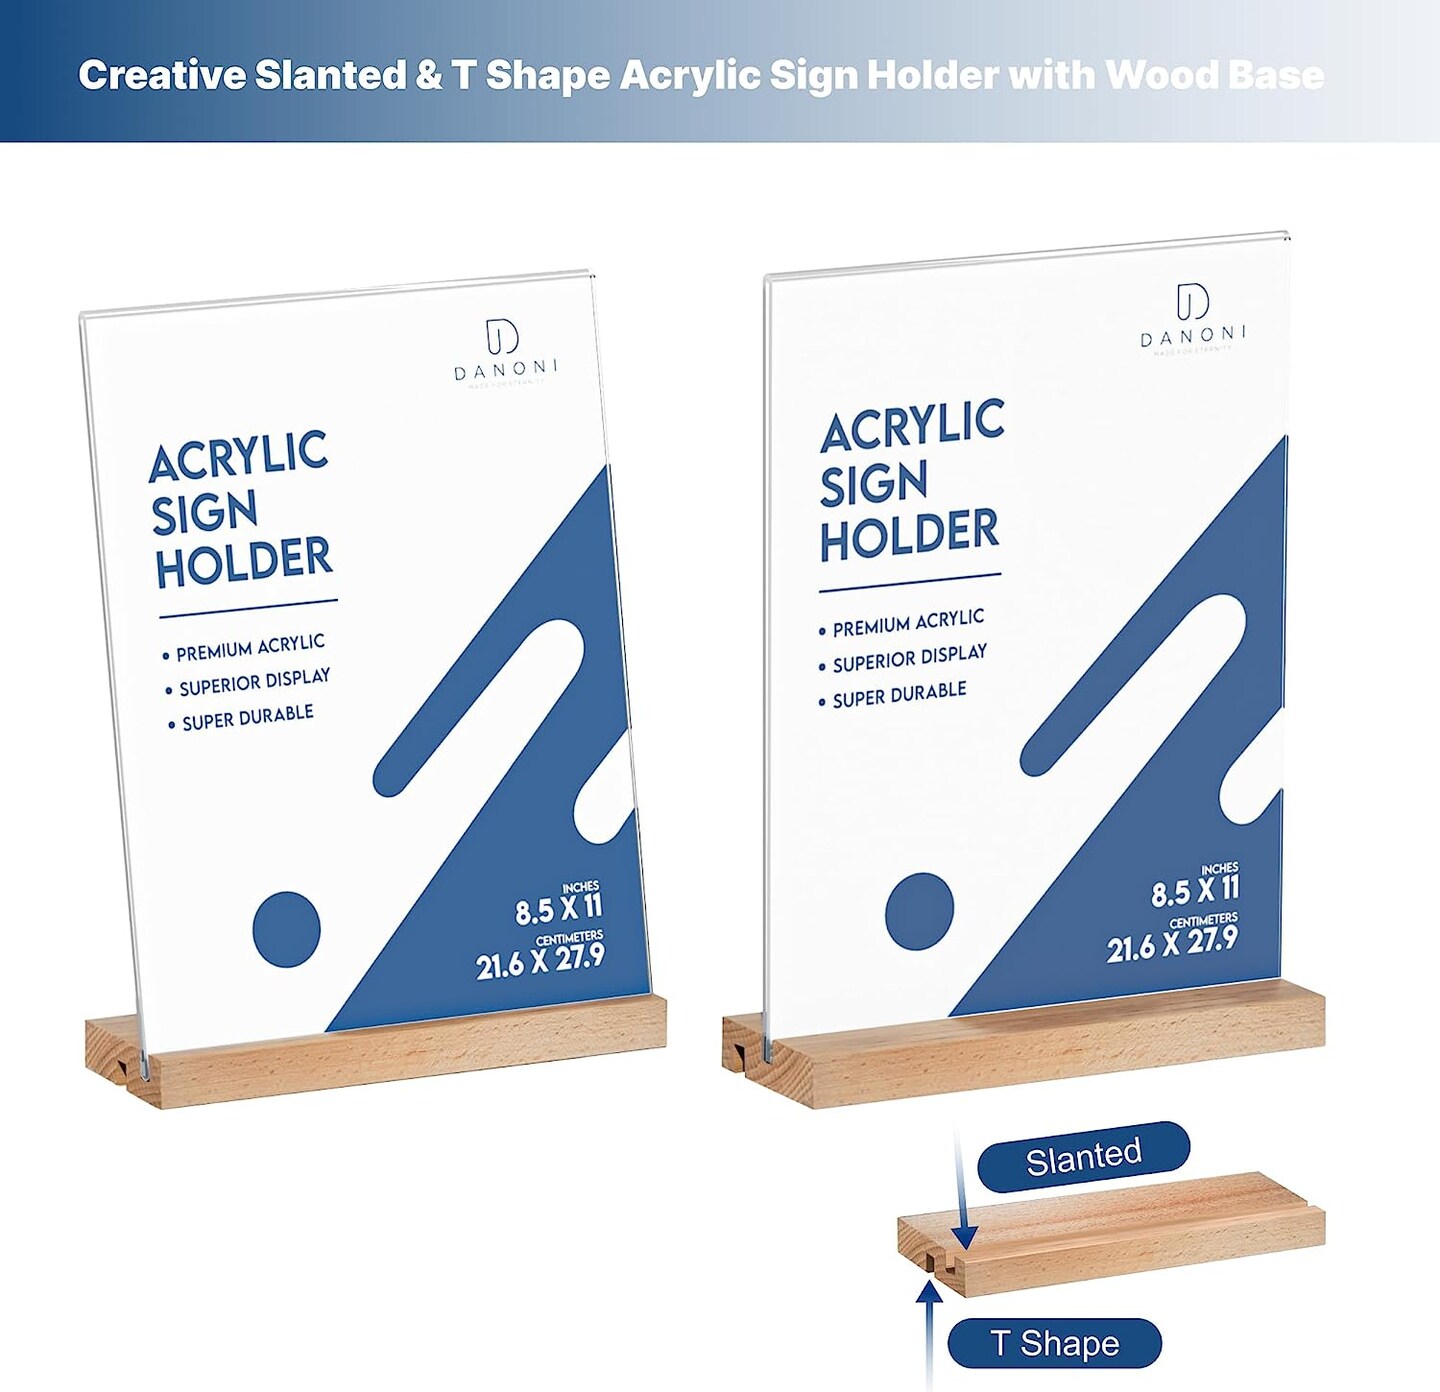 Clear Acrylic Insert Paper Sign Protector For Post Top Frames & Stands,  QueueSolutions AC711